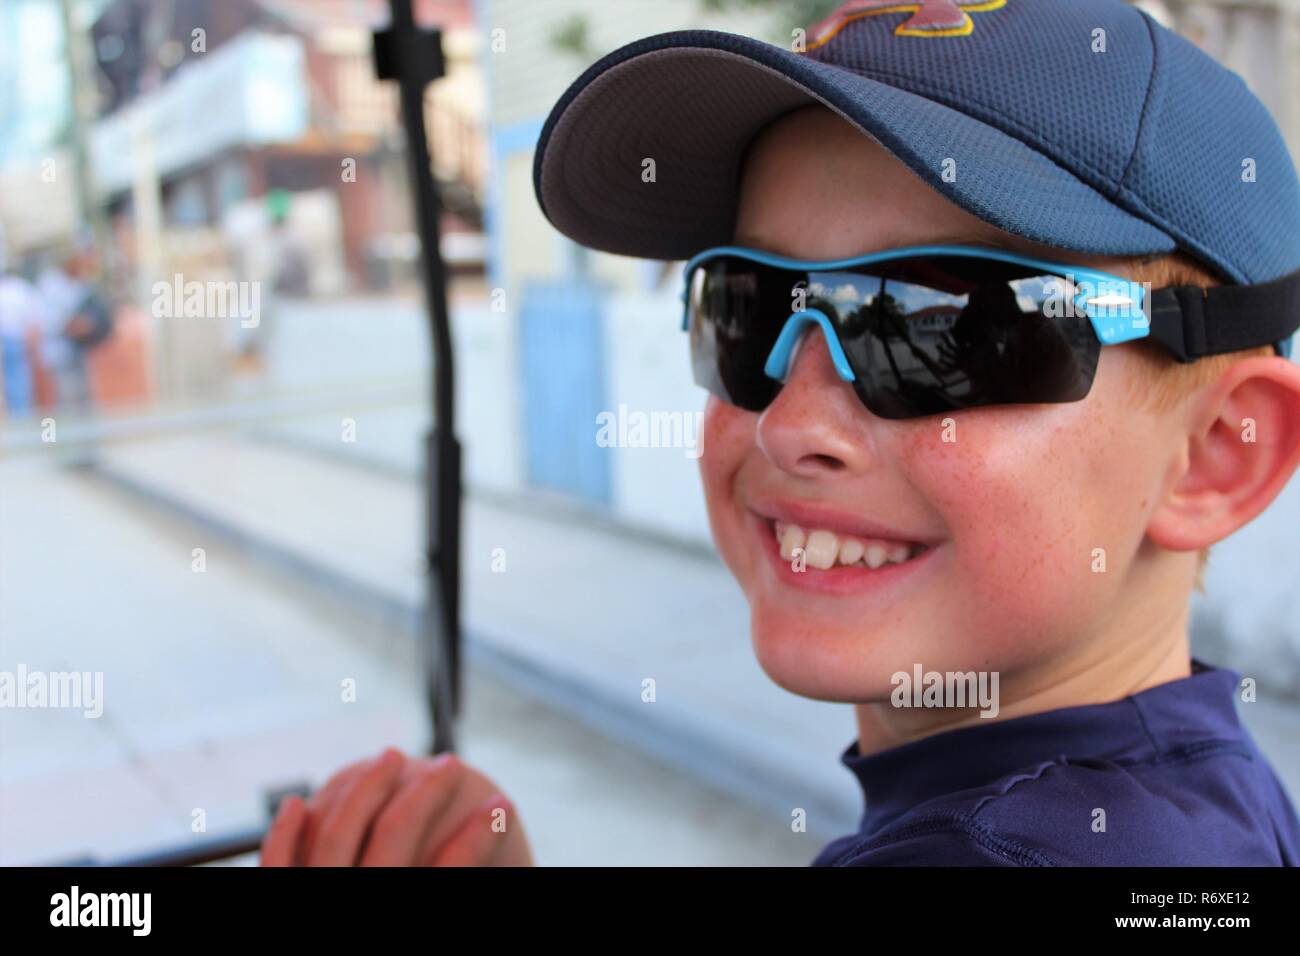 Cute red headed boy with sunglasses and hat turned to smile at camera while riding golf cart Stock Photo